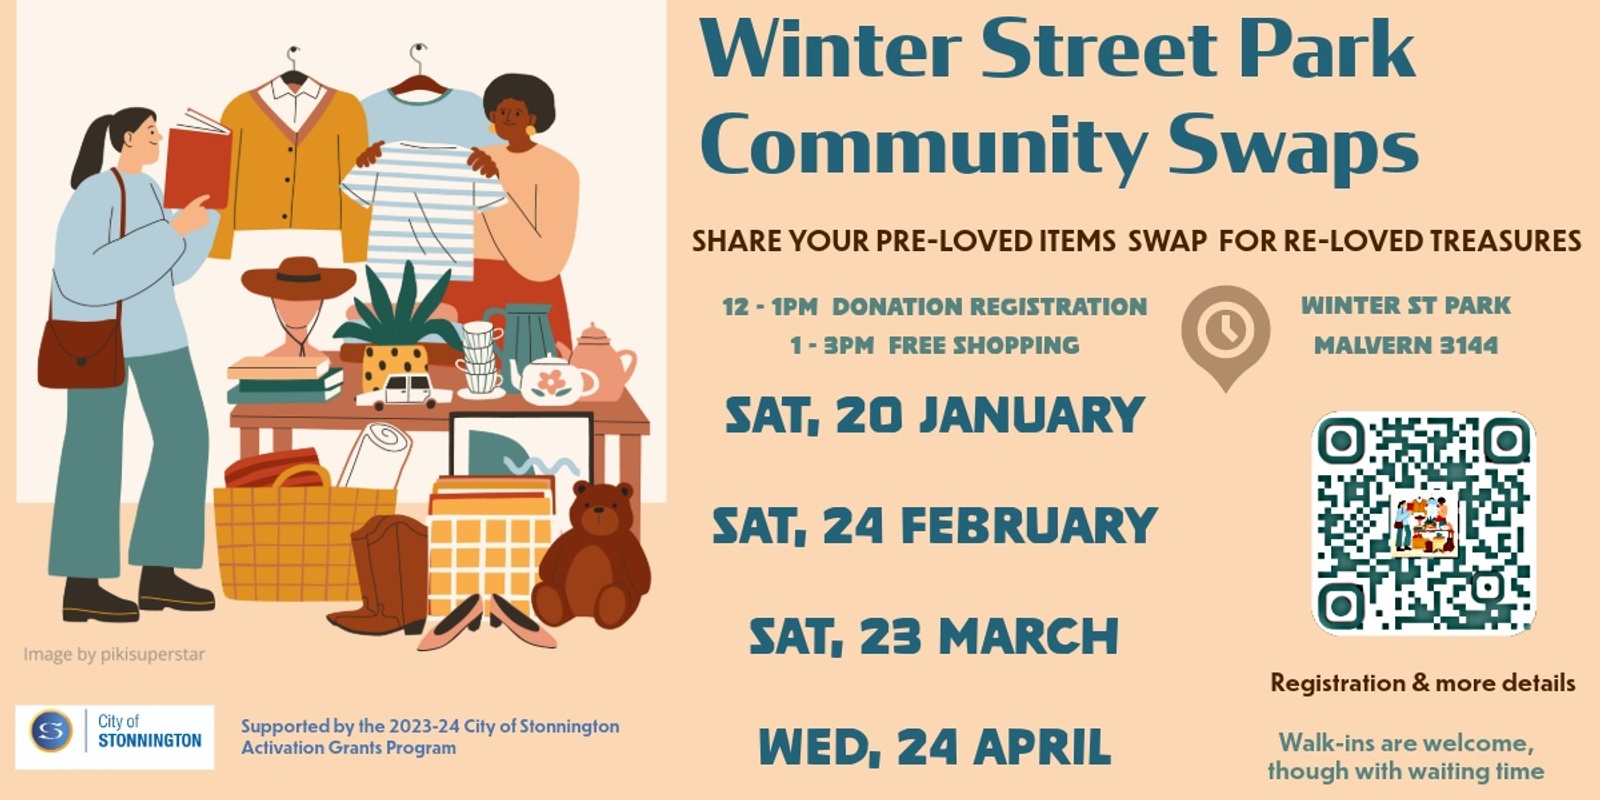 Banner image for Winter St Park community swaps  - Share your pre-loved items and swap for re-loved treasures